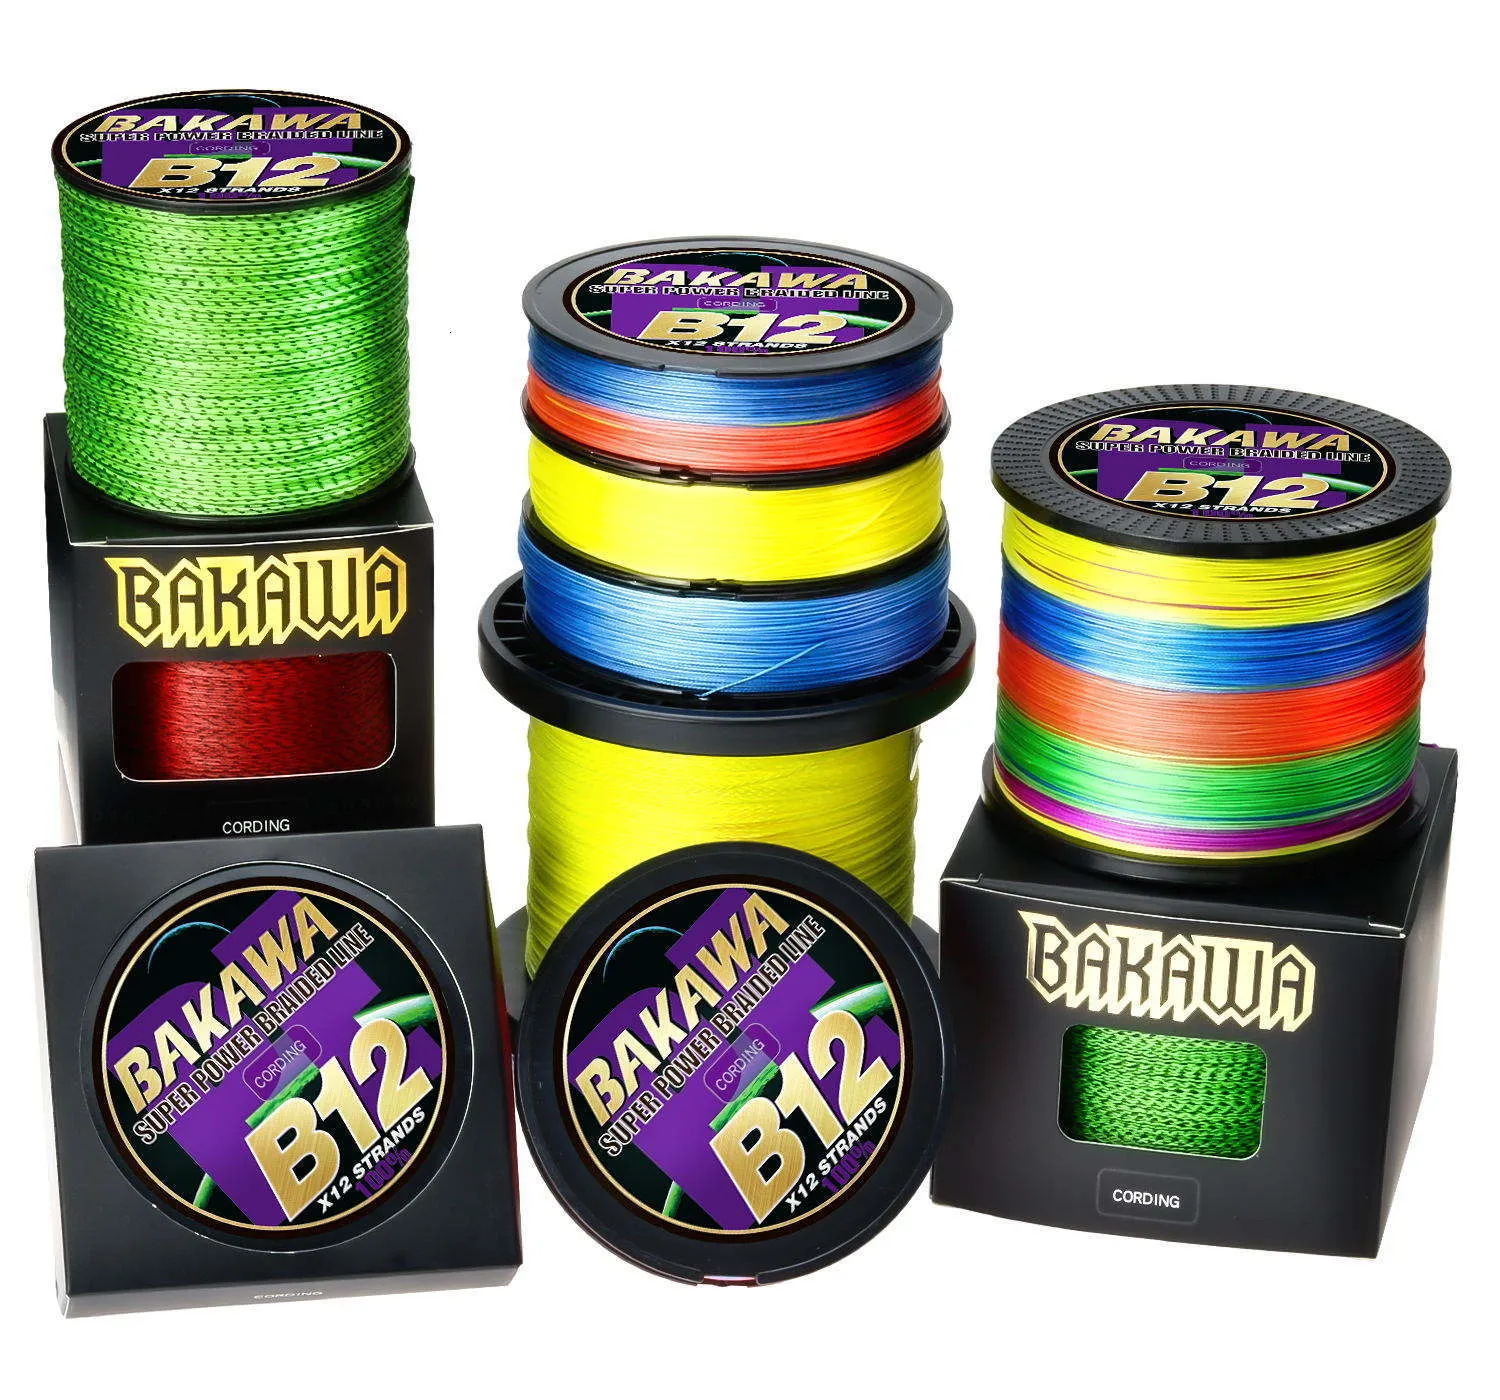 BAKAWA Super Strong Best Braided Fishing Line Fishing Line PE Material, 128  Strands, 500M 1000M Lengths X12 X8 From Nian07, $4.41